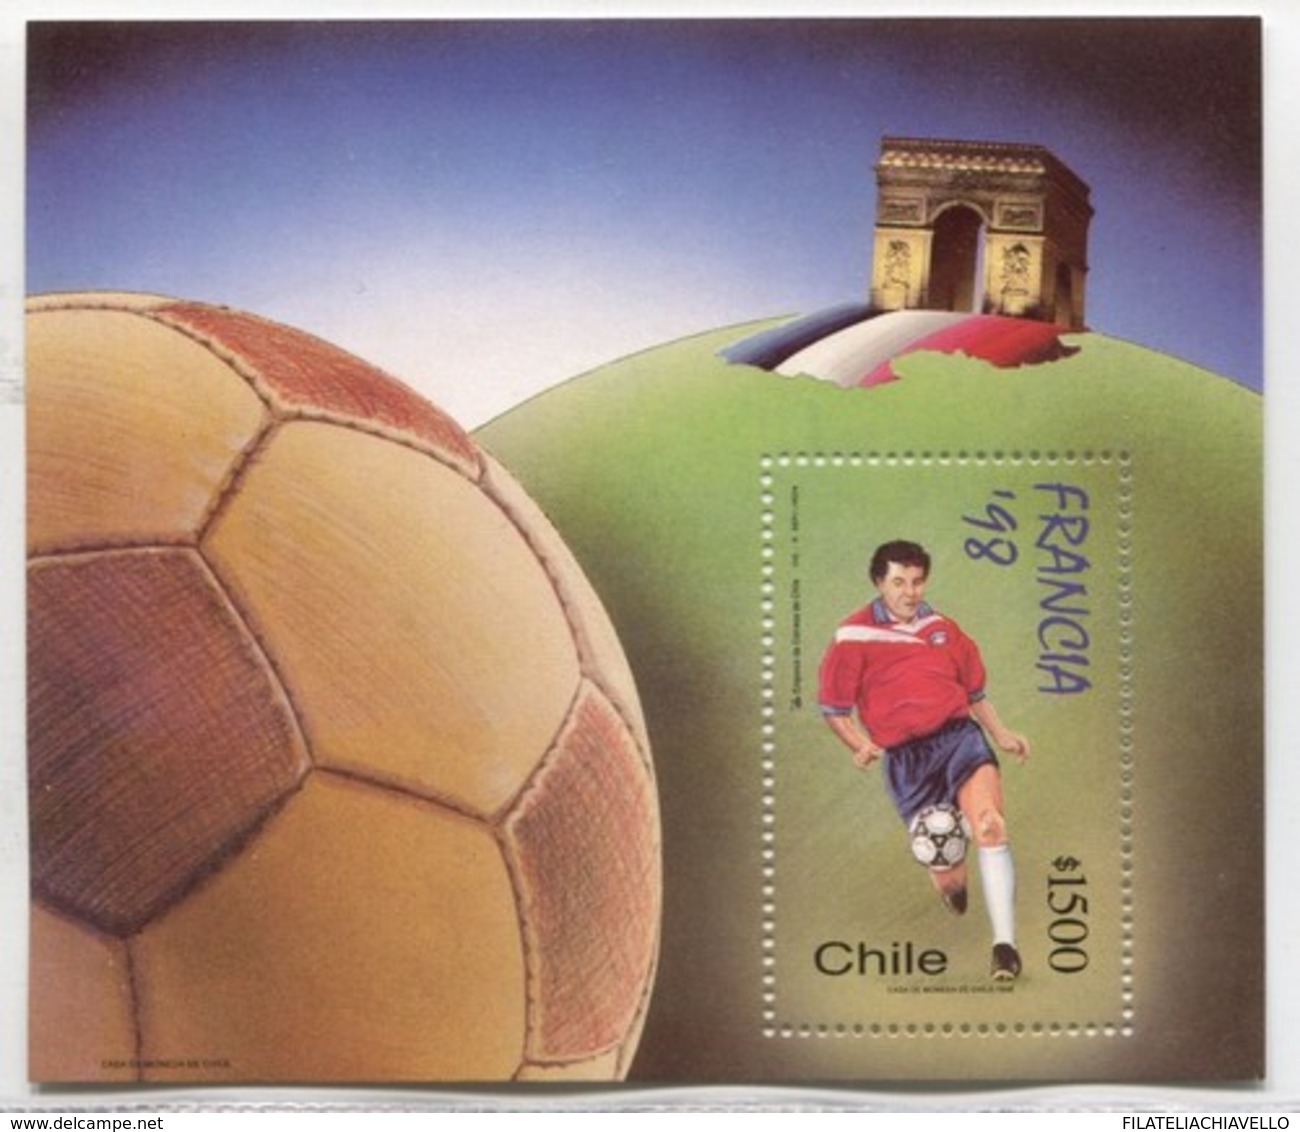 SOCCER FOOTBALL SPORT CHILE Good MINT MNH STAMP SHEET # 45397  051219 - Chile